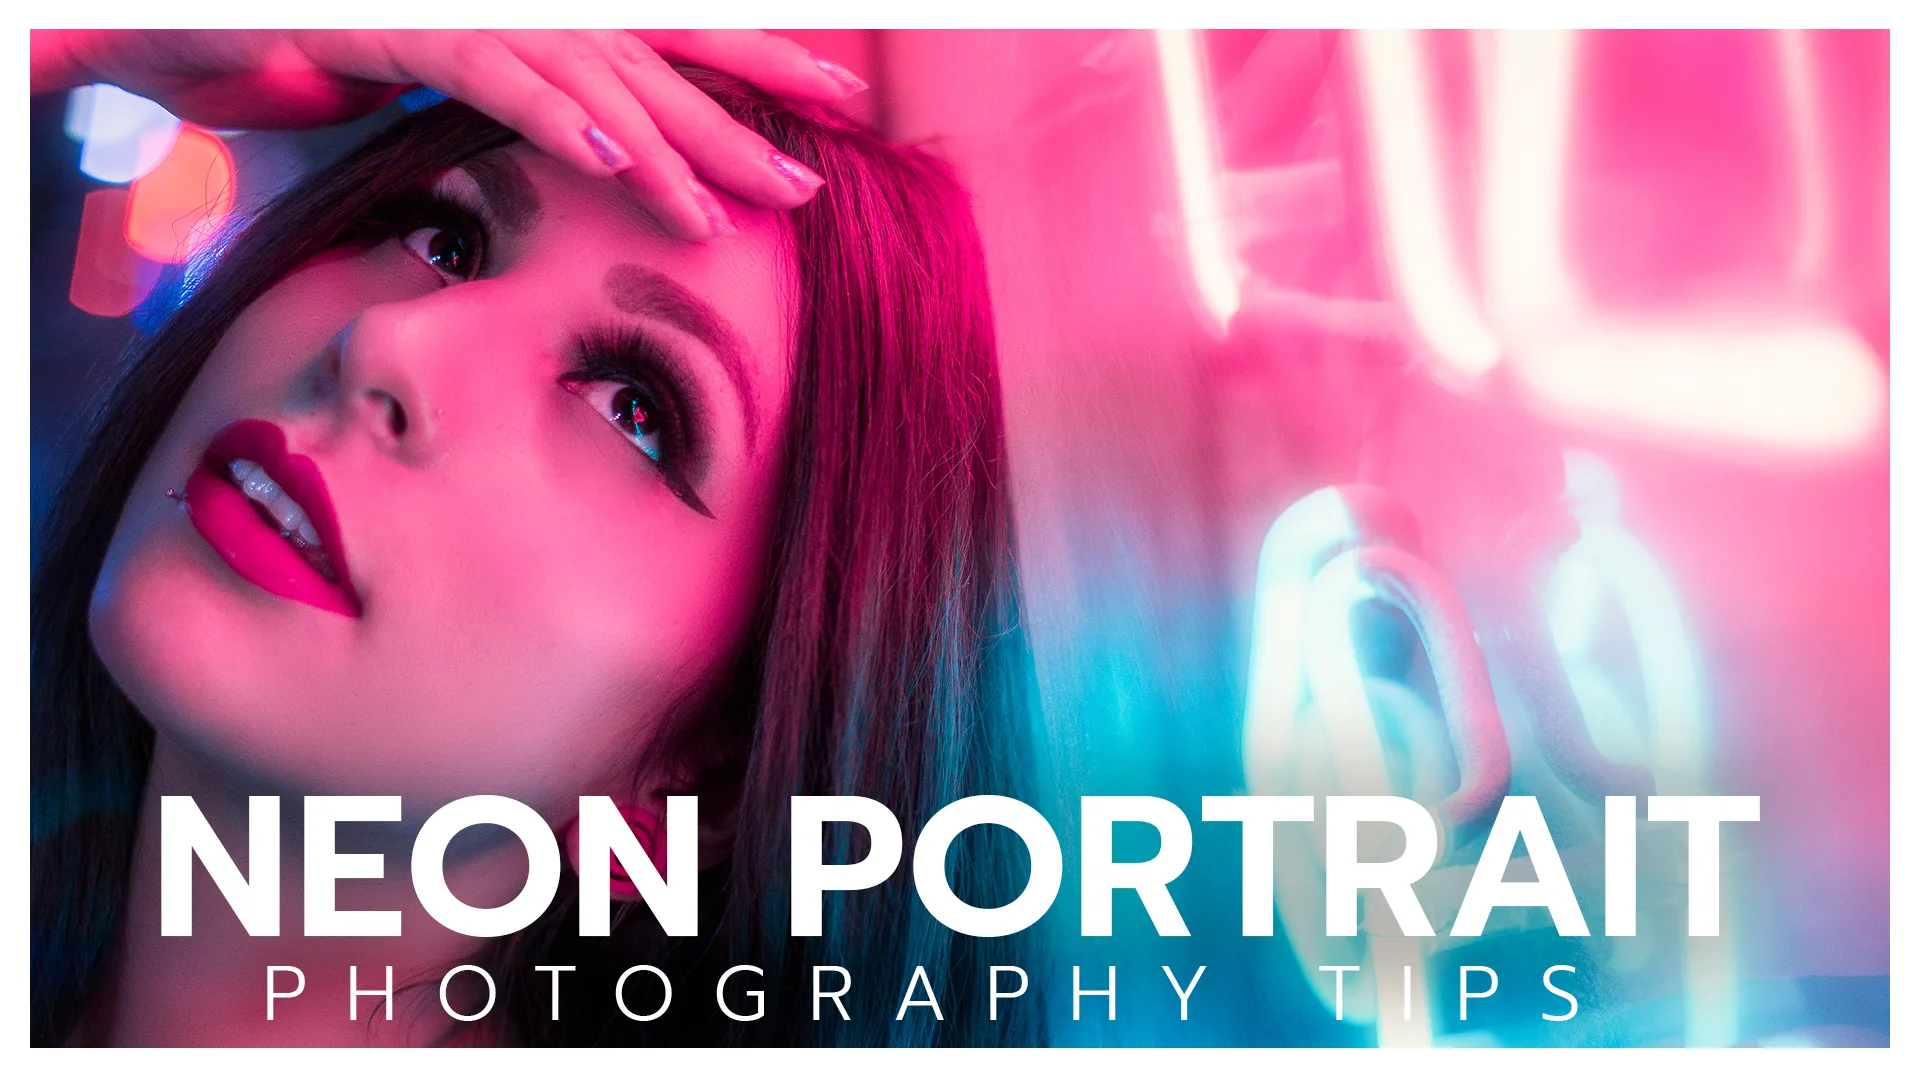 You are currently viewing 10 Neon Portrait Photography Tips